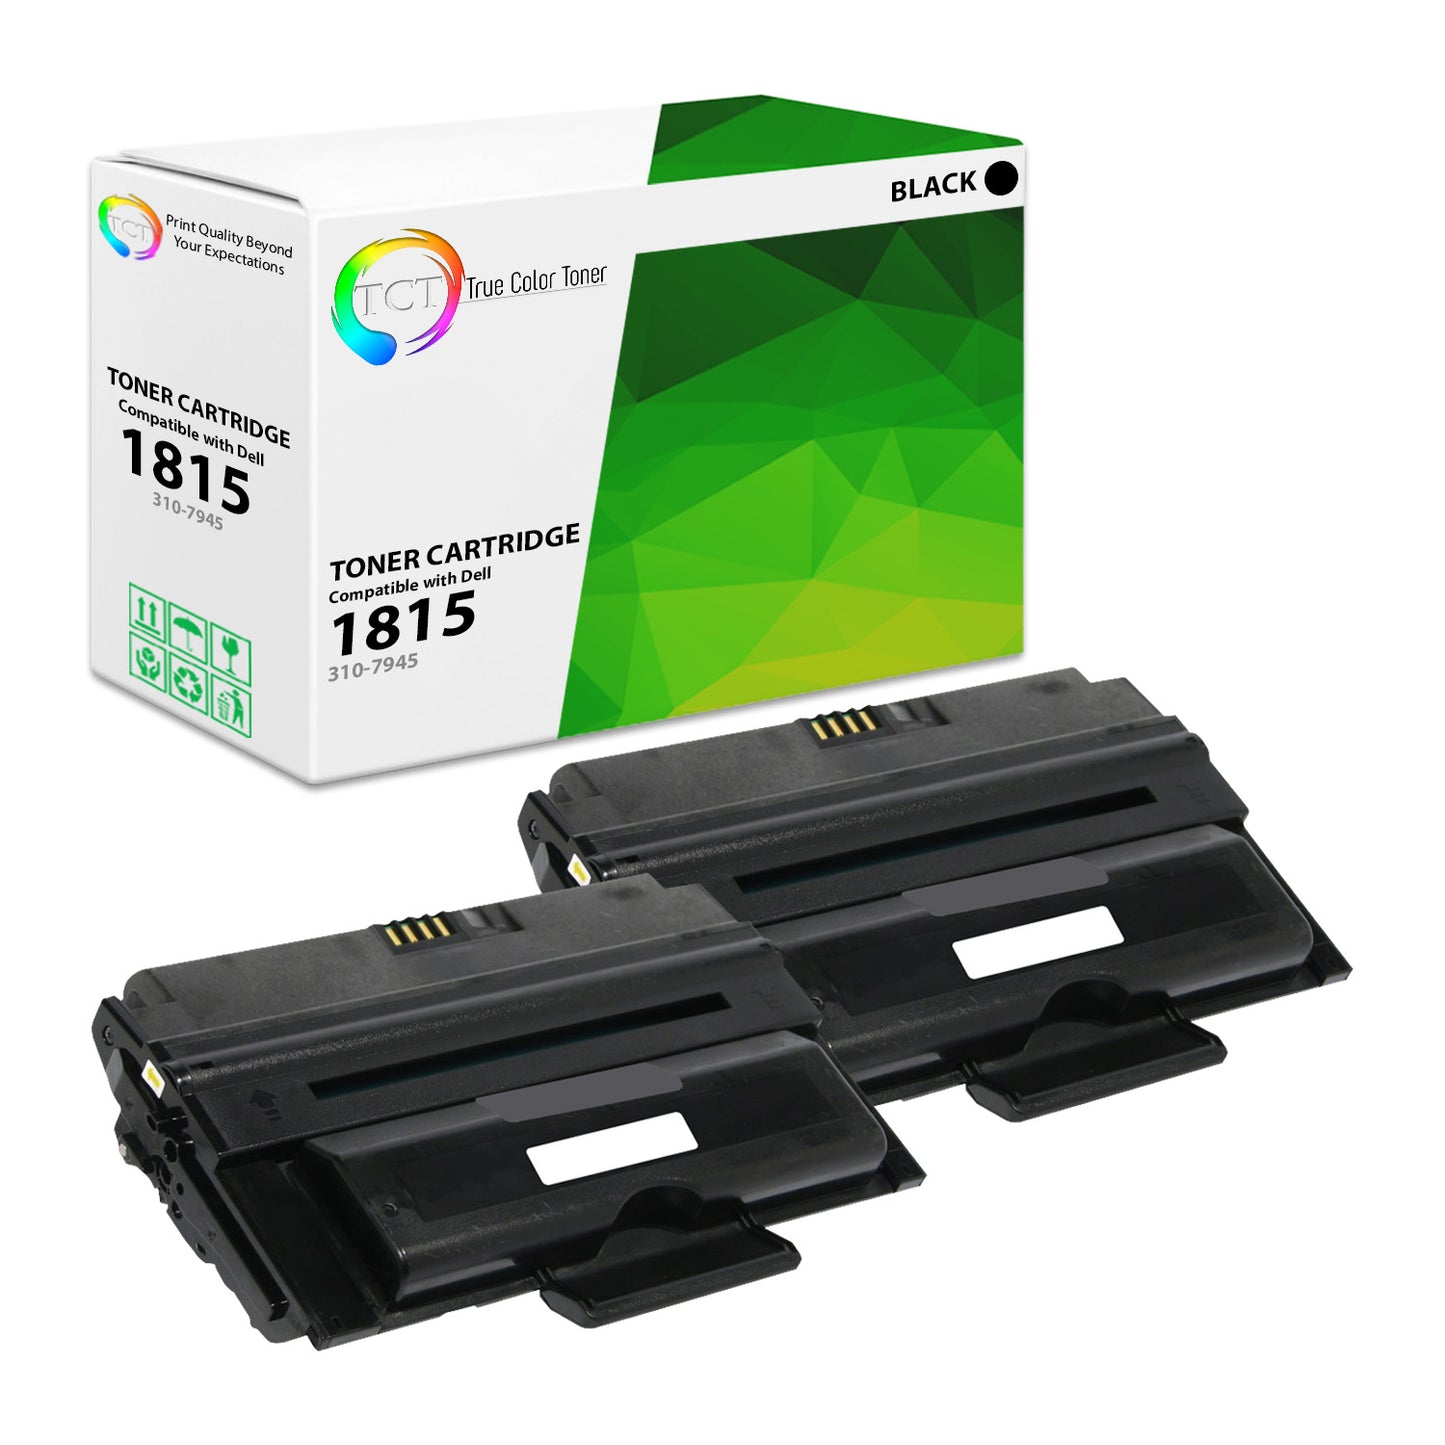 TCT Compatible Toner Cartridge Replacement for the Dell 1815 Series - 2 Pack Black